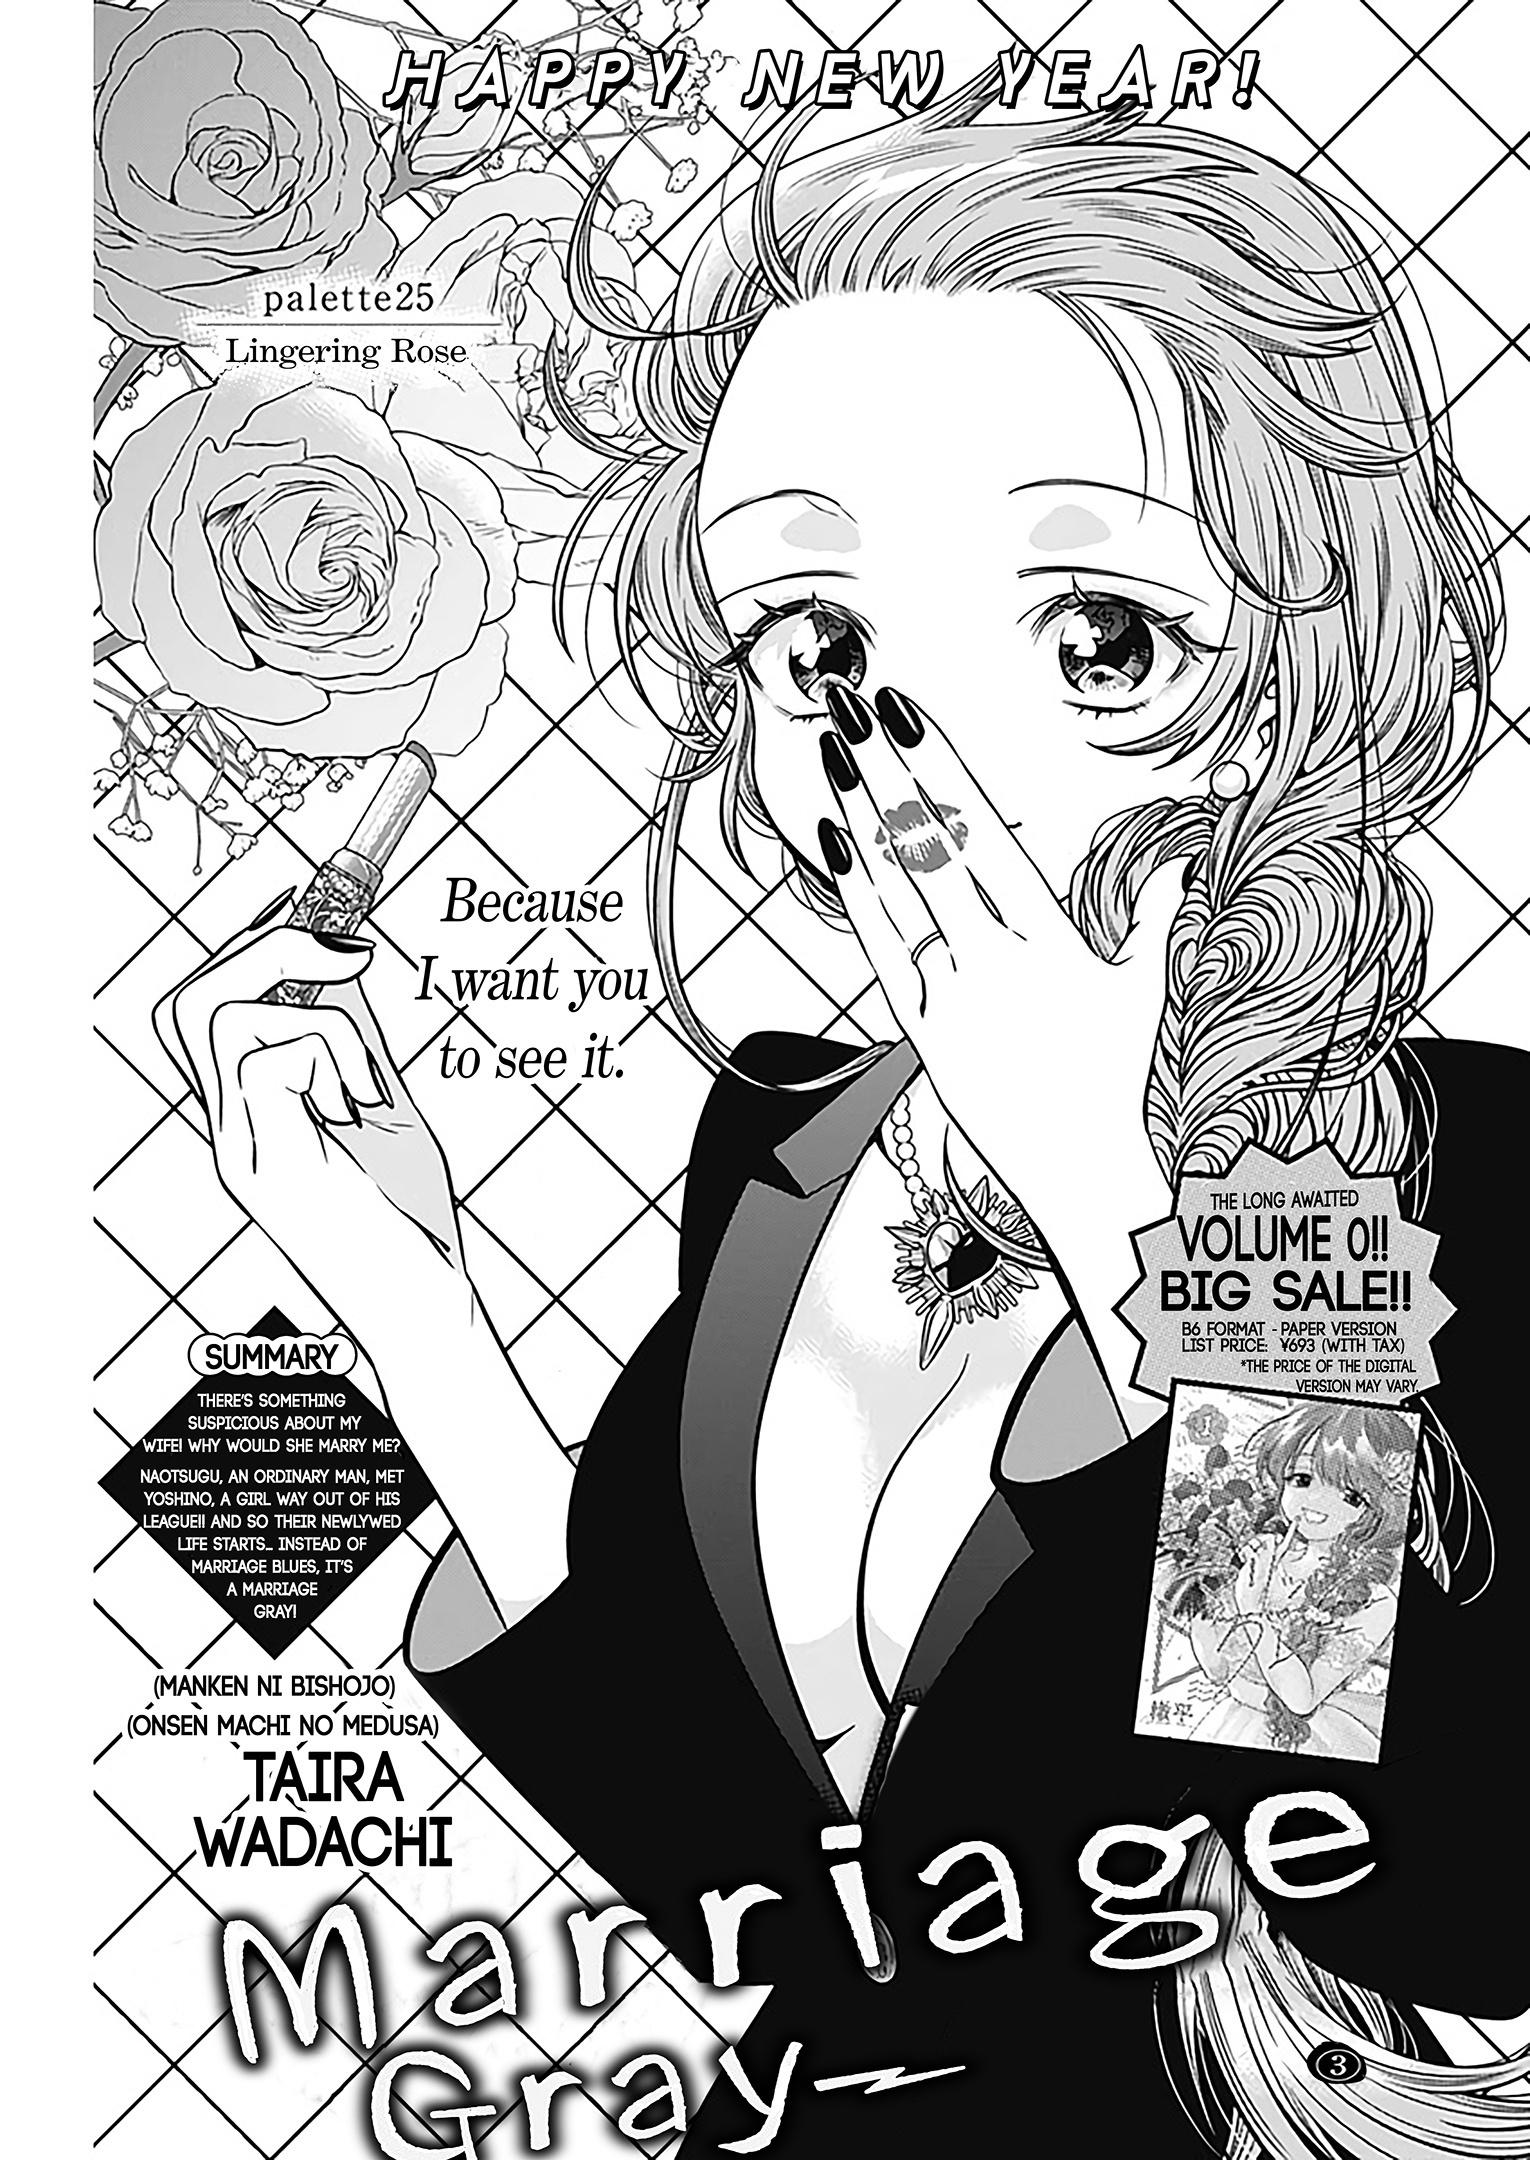 Marriage Grey Vol.2 Chapter 25